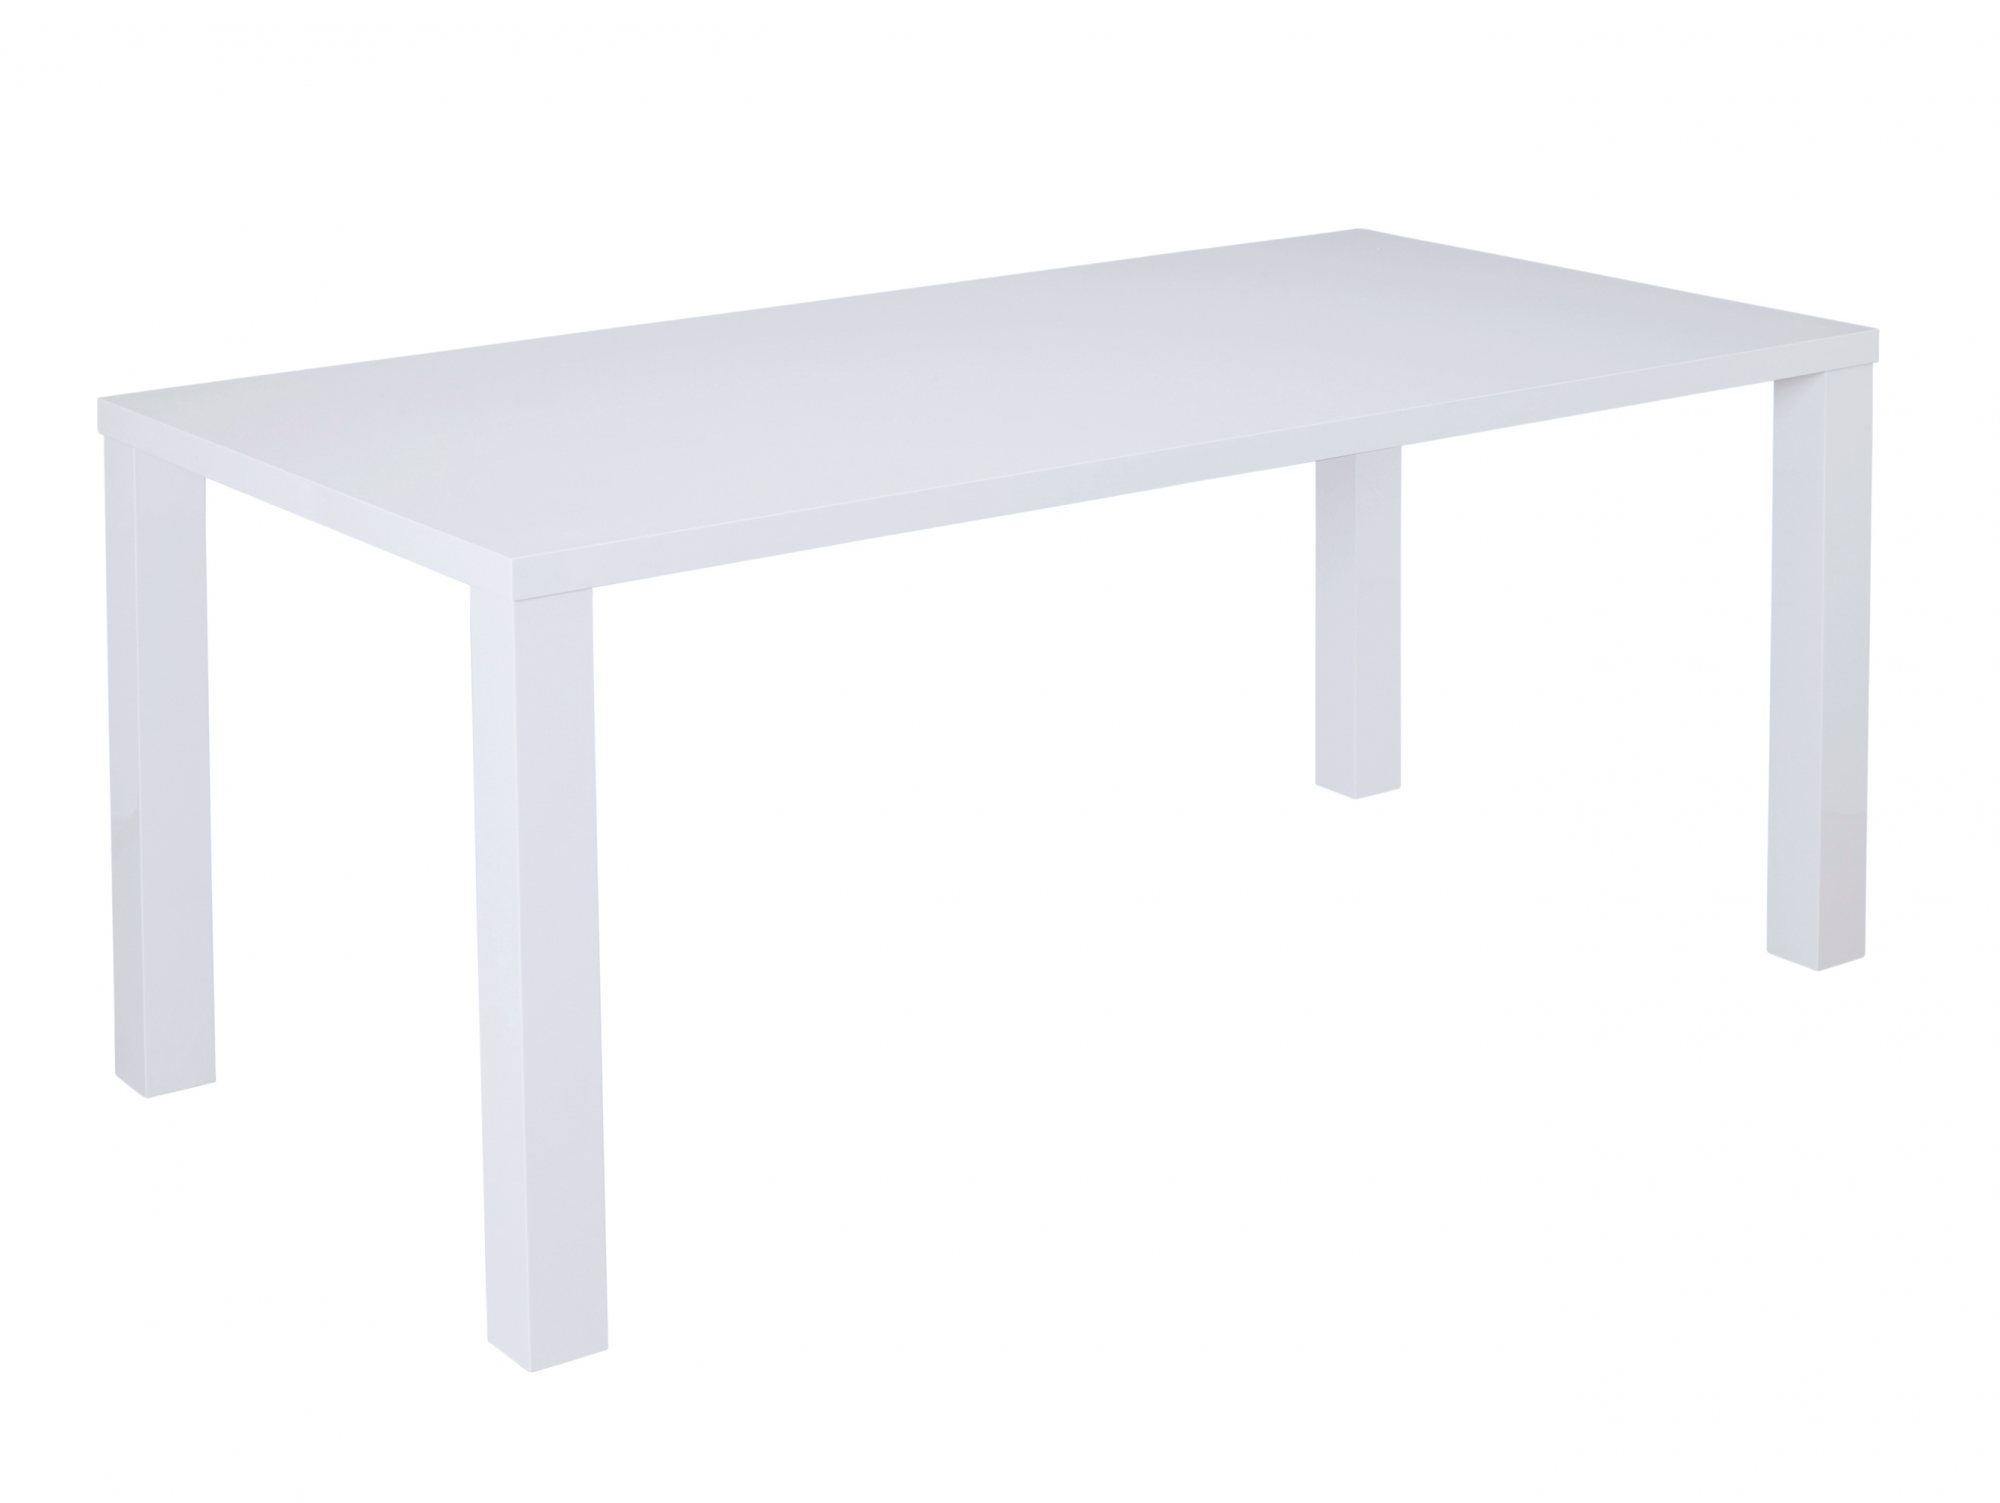 LPD LPD Monroe Puro 180cm White High Gloss Dining Table (Flat Packed)